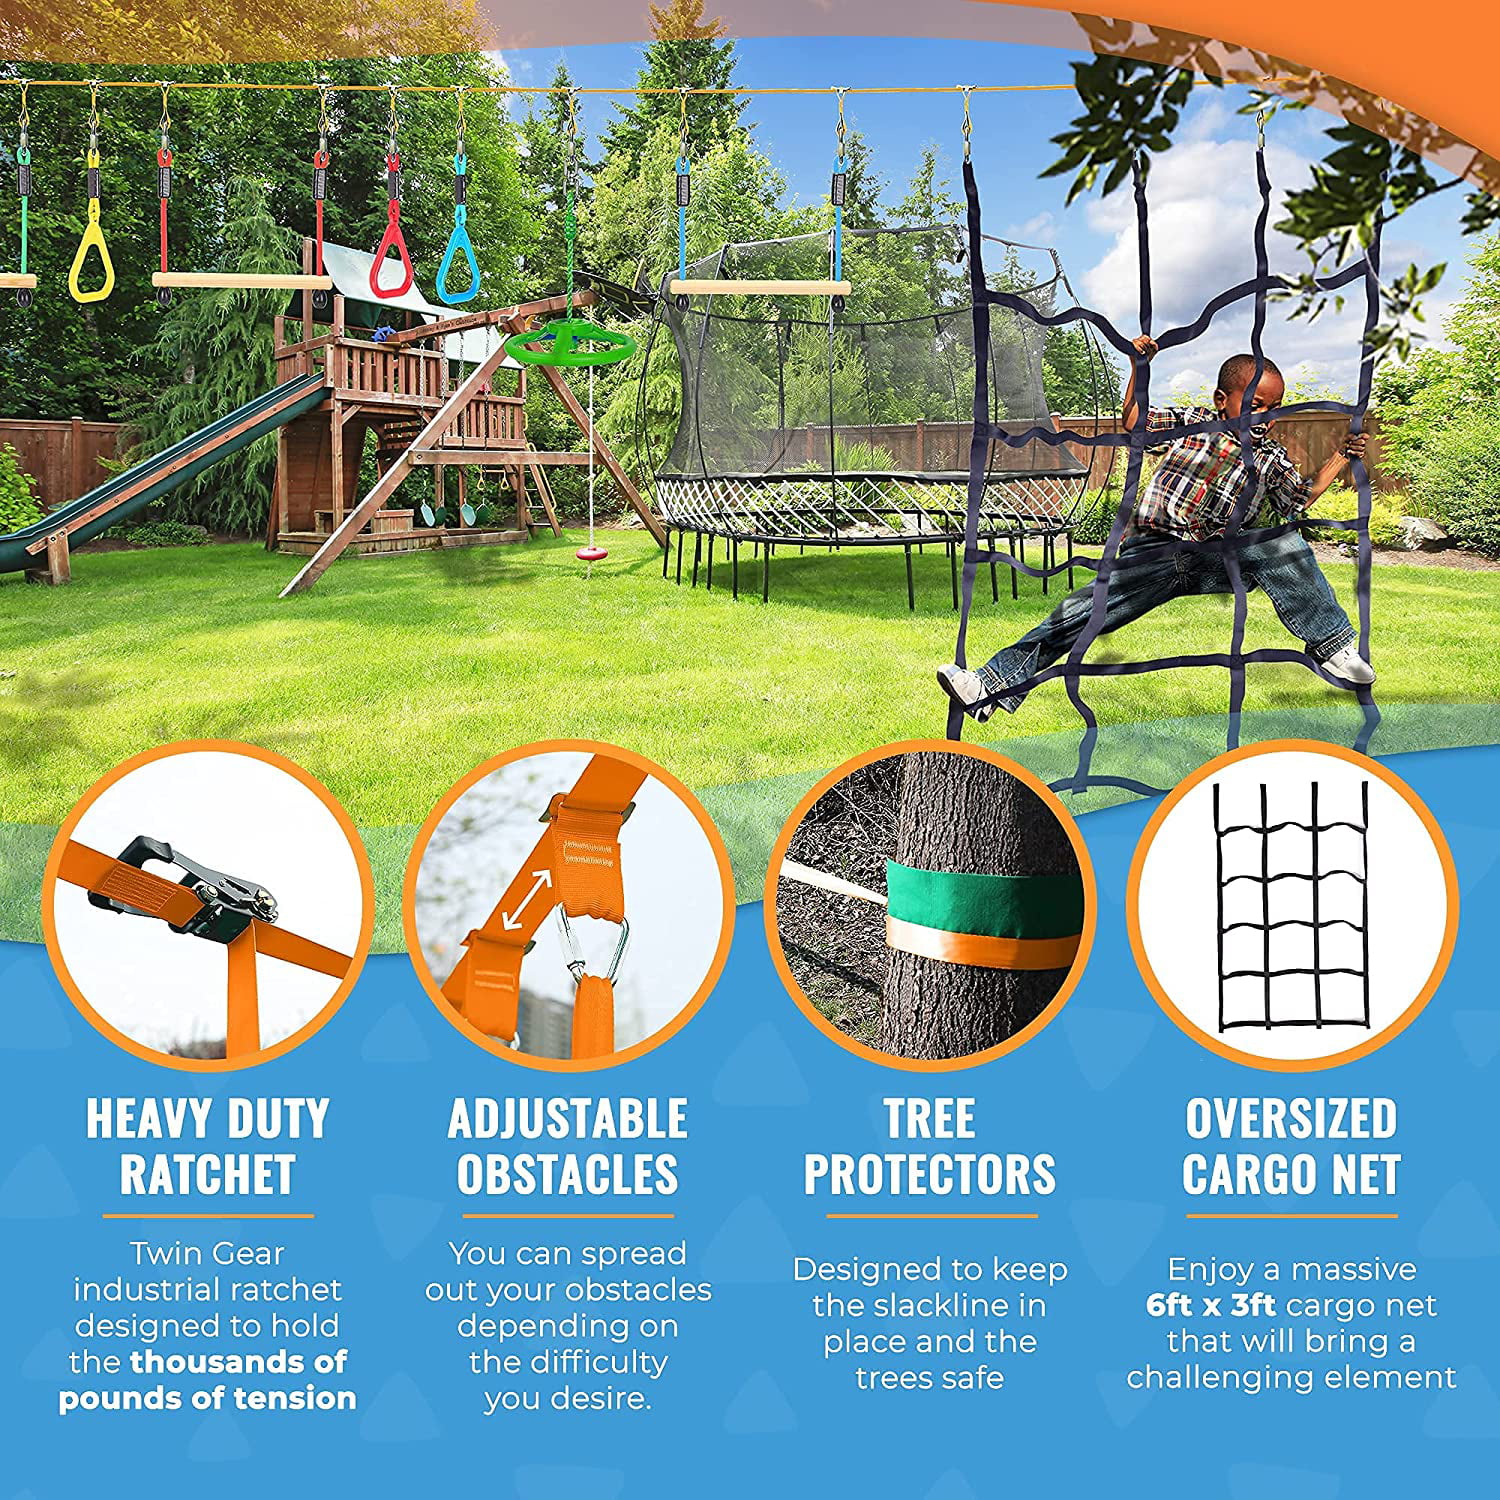 Hyponix 60' Ninja Warrior Obstacle Course for Kids 